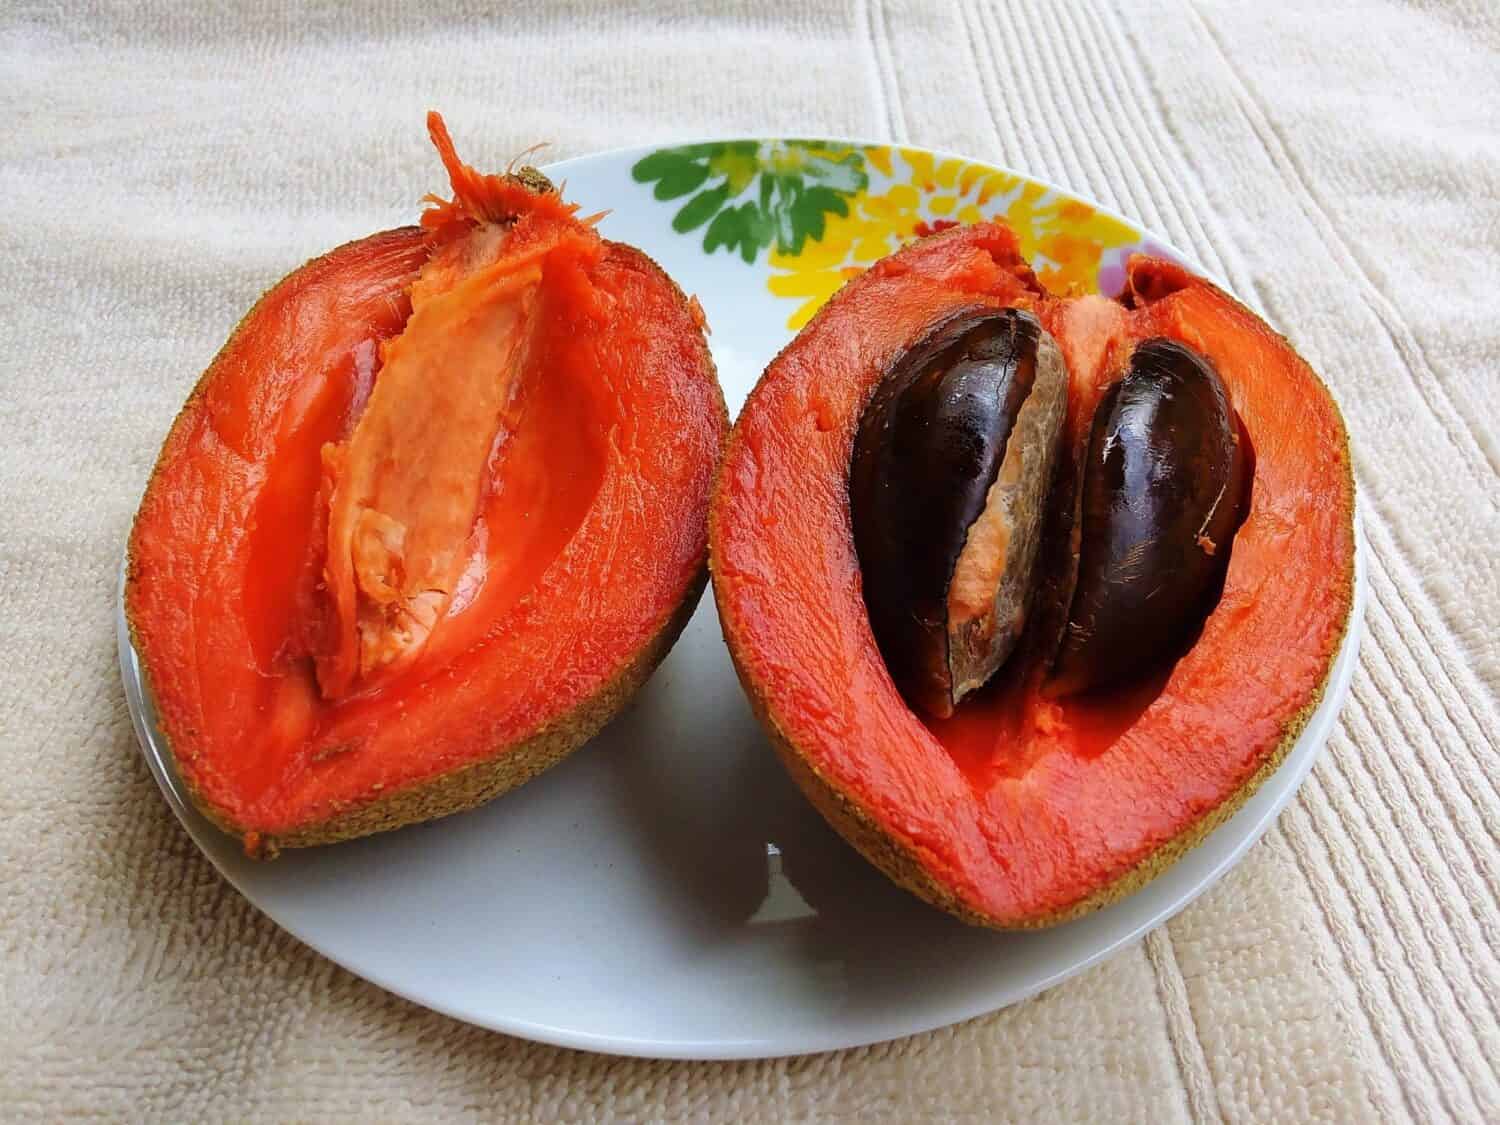 Close-up of Mexican red tropical fruit mamey sapote (also known as pouteria sapote) cut in halves 